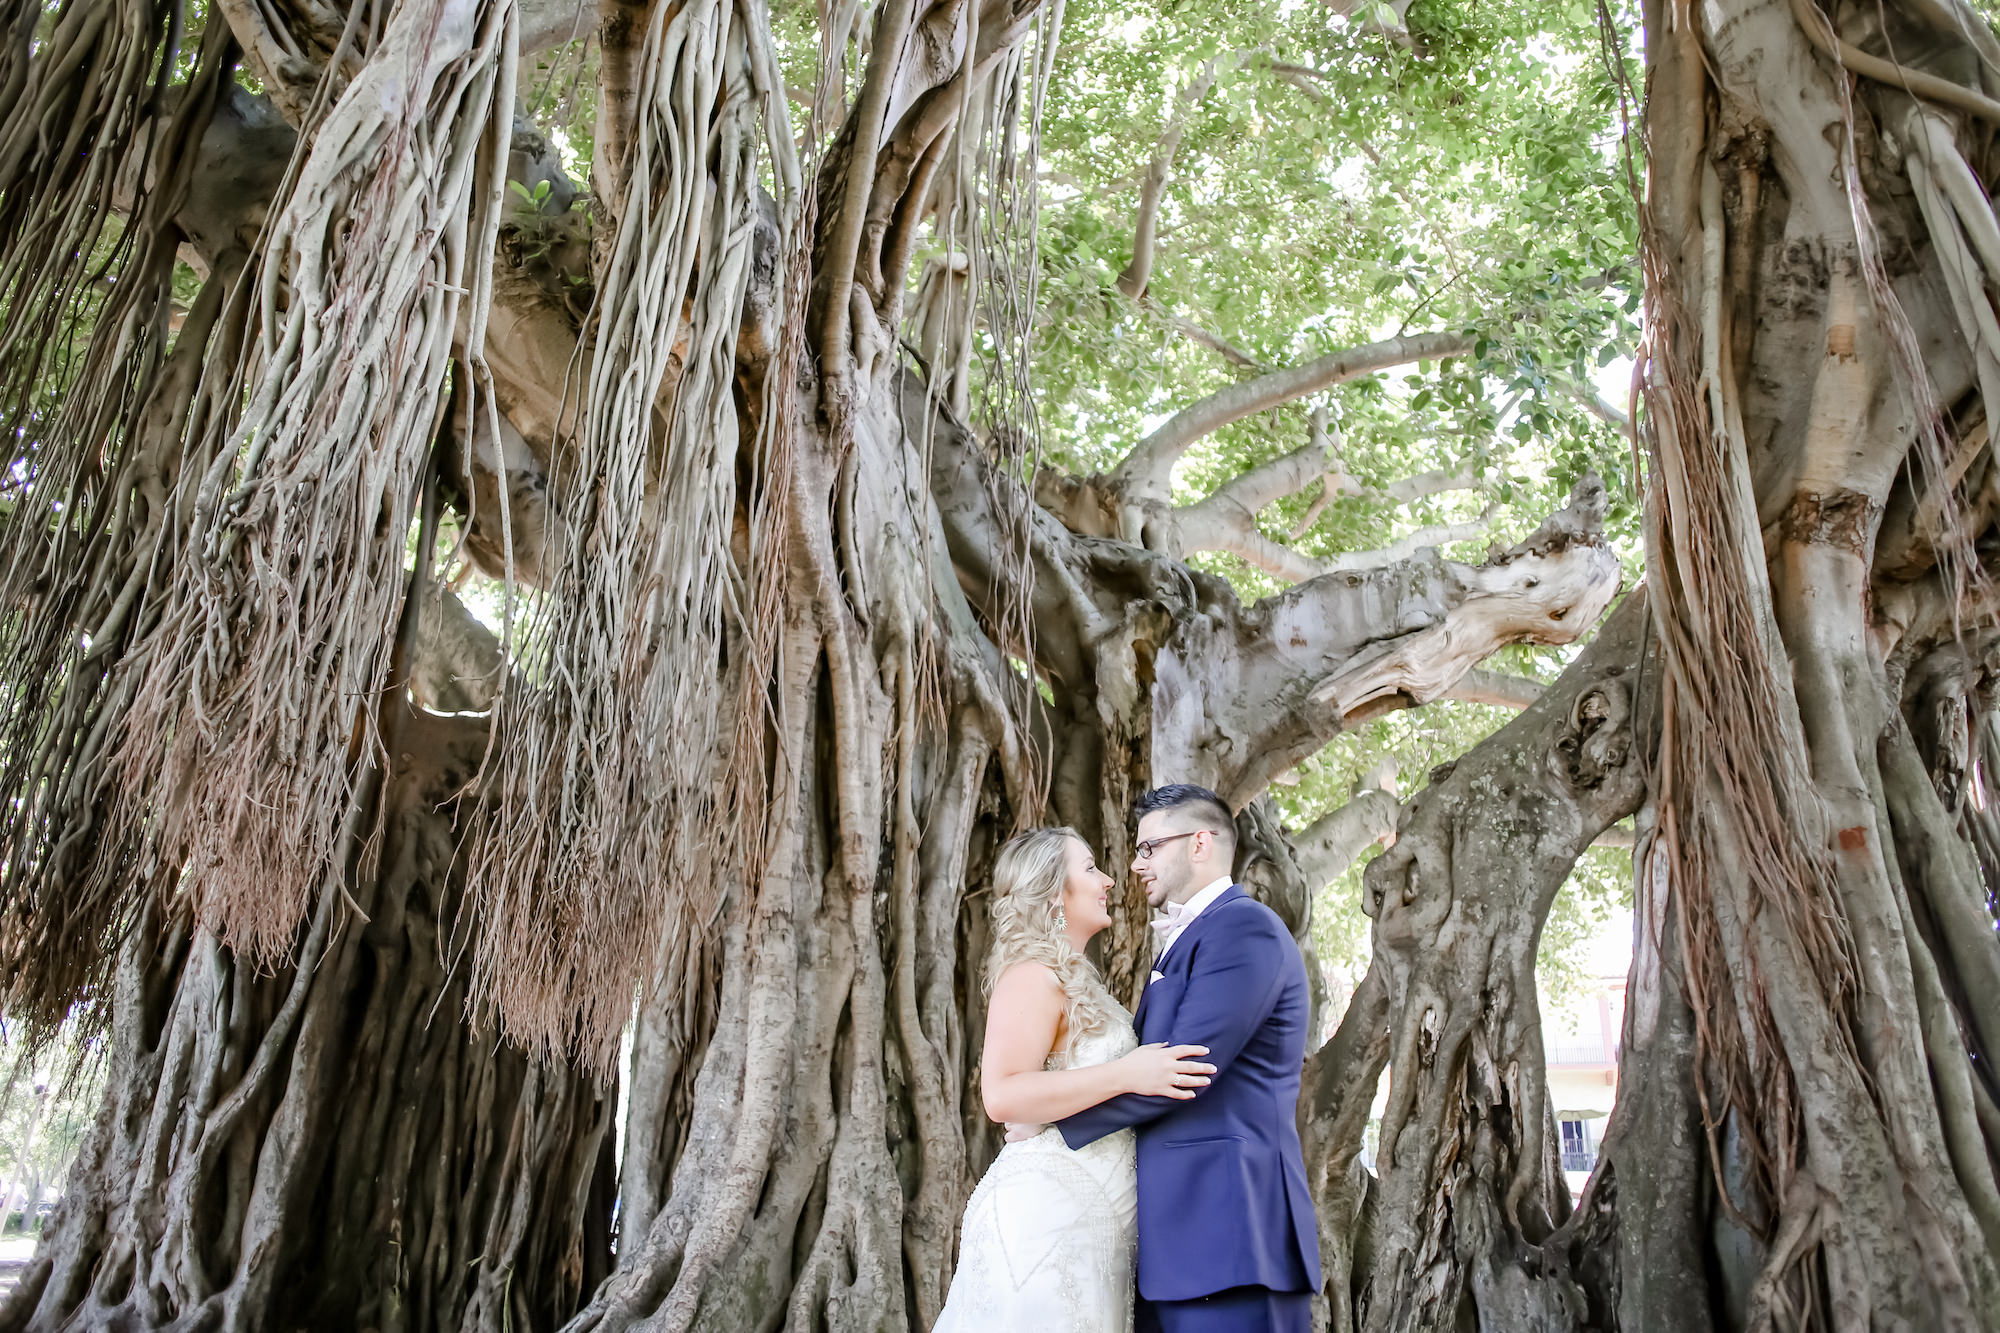 Florida Bride and Groom Wedding Portrait Under Towering Banyan Trees in Straub Park in Downtown St. Pete | Florida Wedding Photographer Lifelong Photography Studios